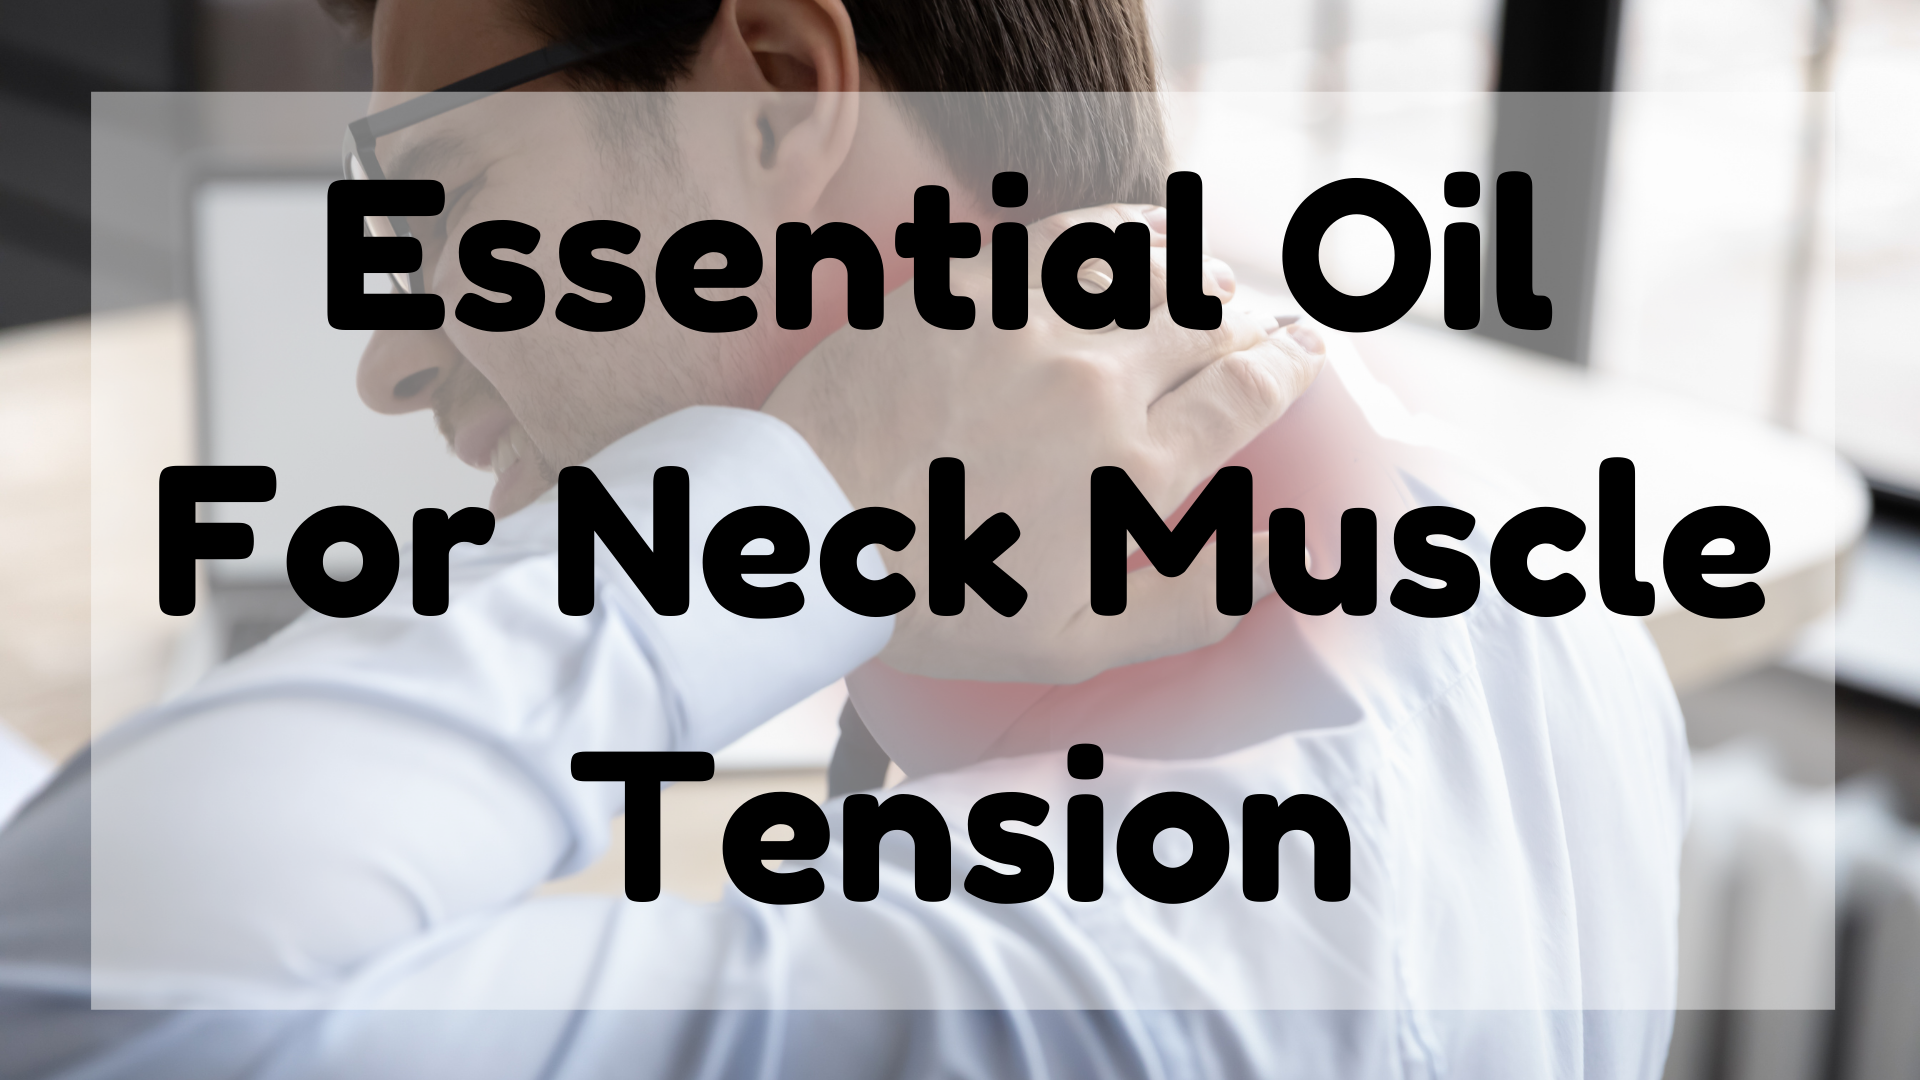 Essential Oil For Neck Muscle Tension